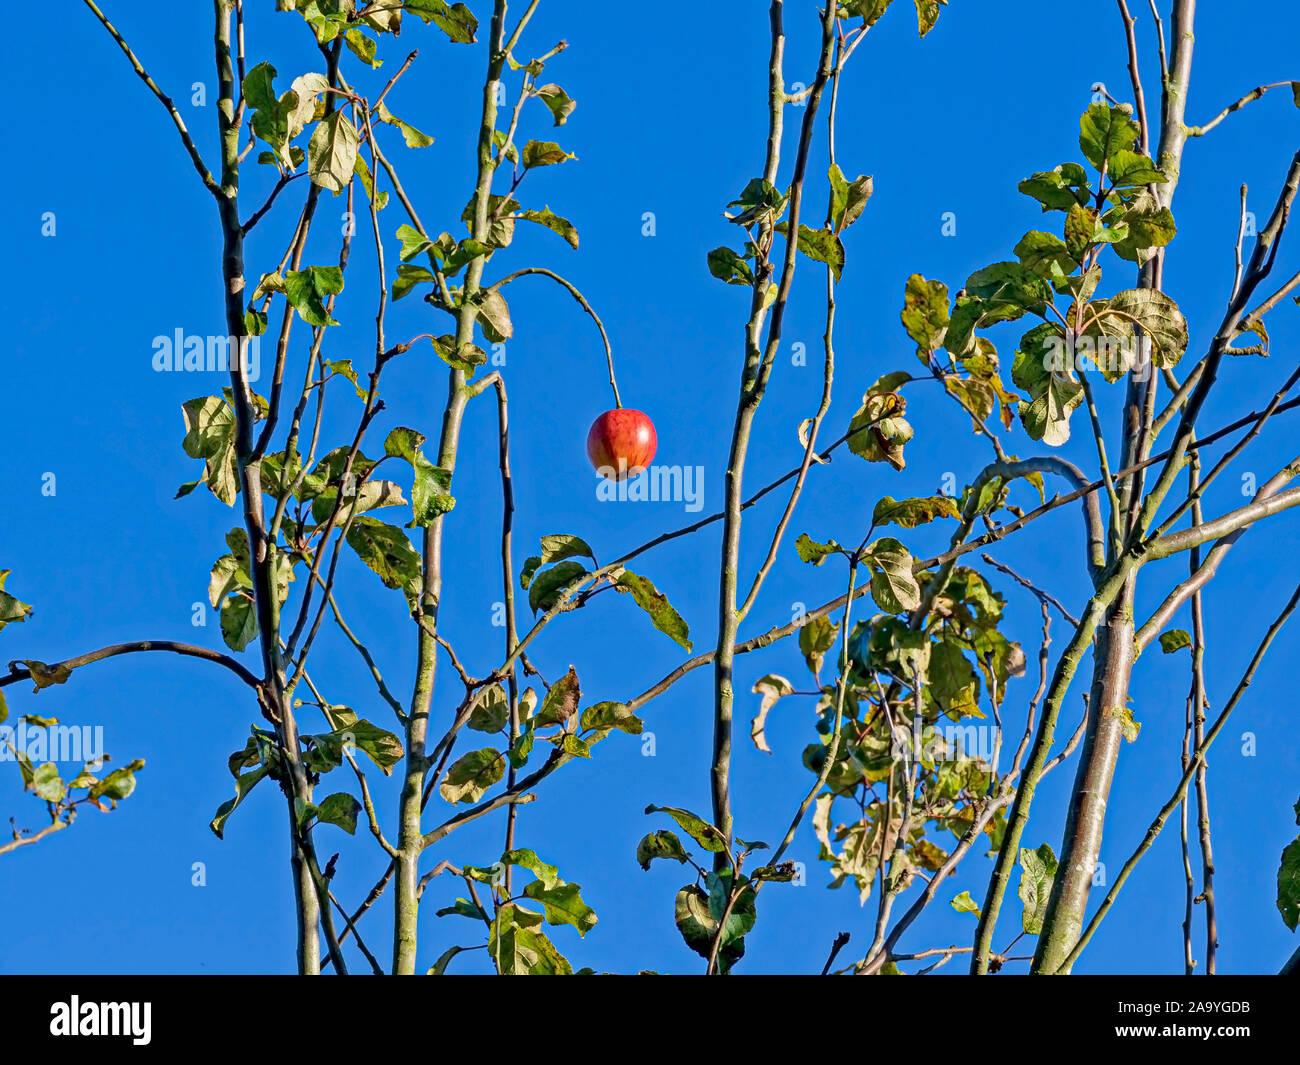 Single ripe red apple on a branch of an apple tree with green leaves against a blue sky background Stock Photo